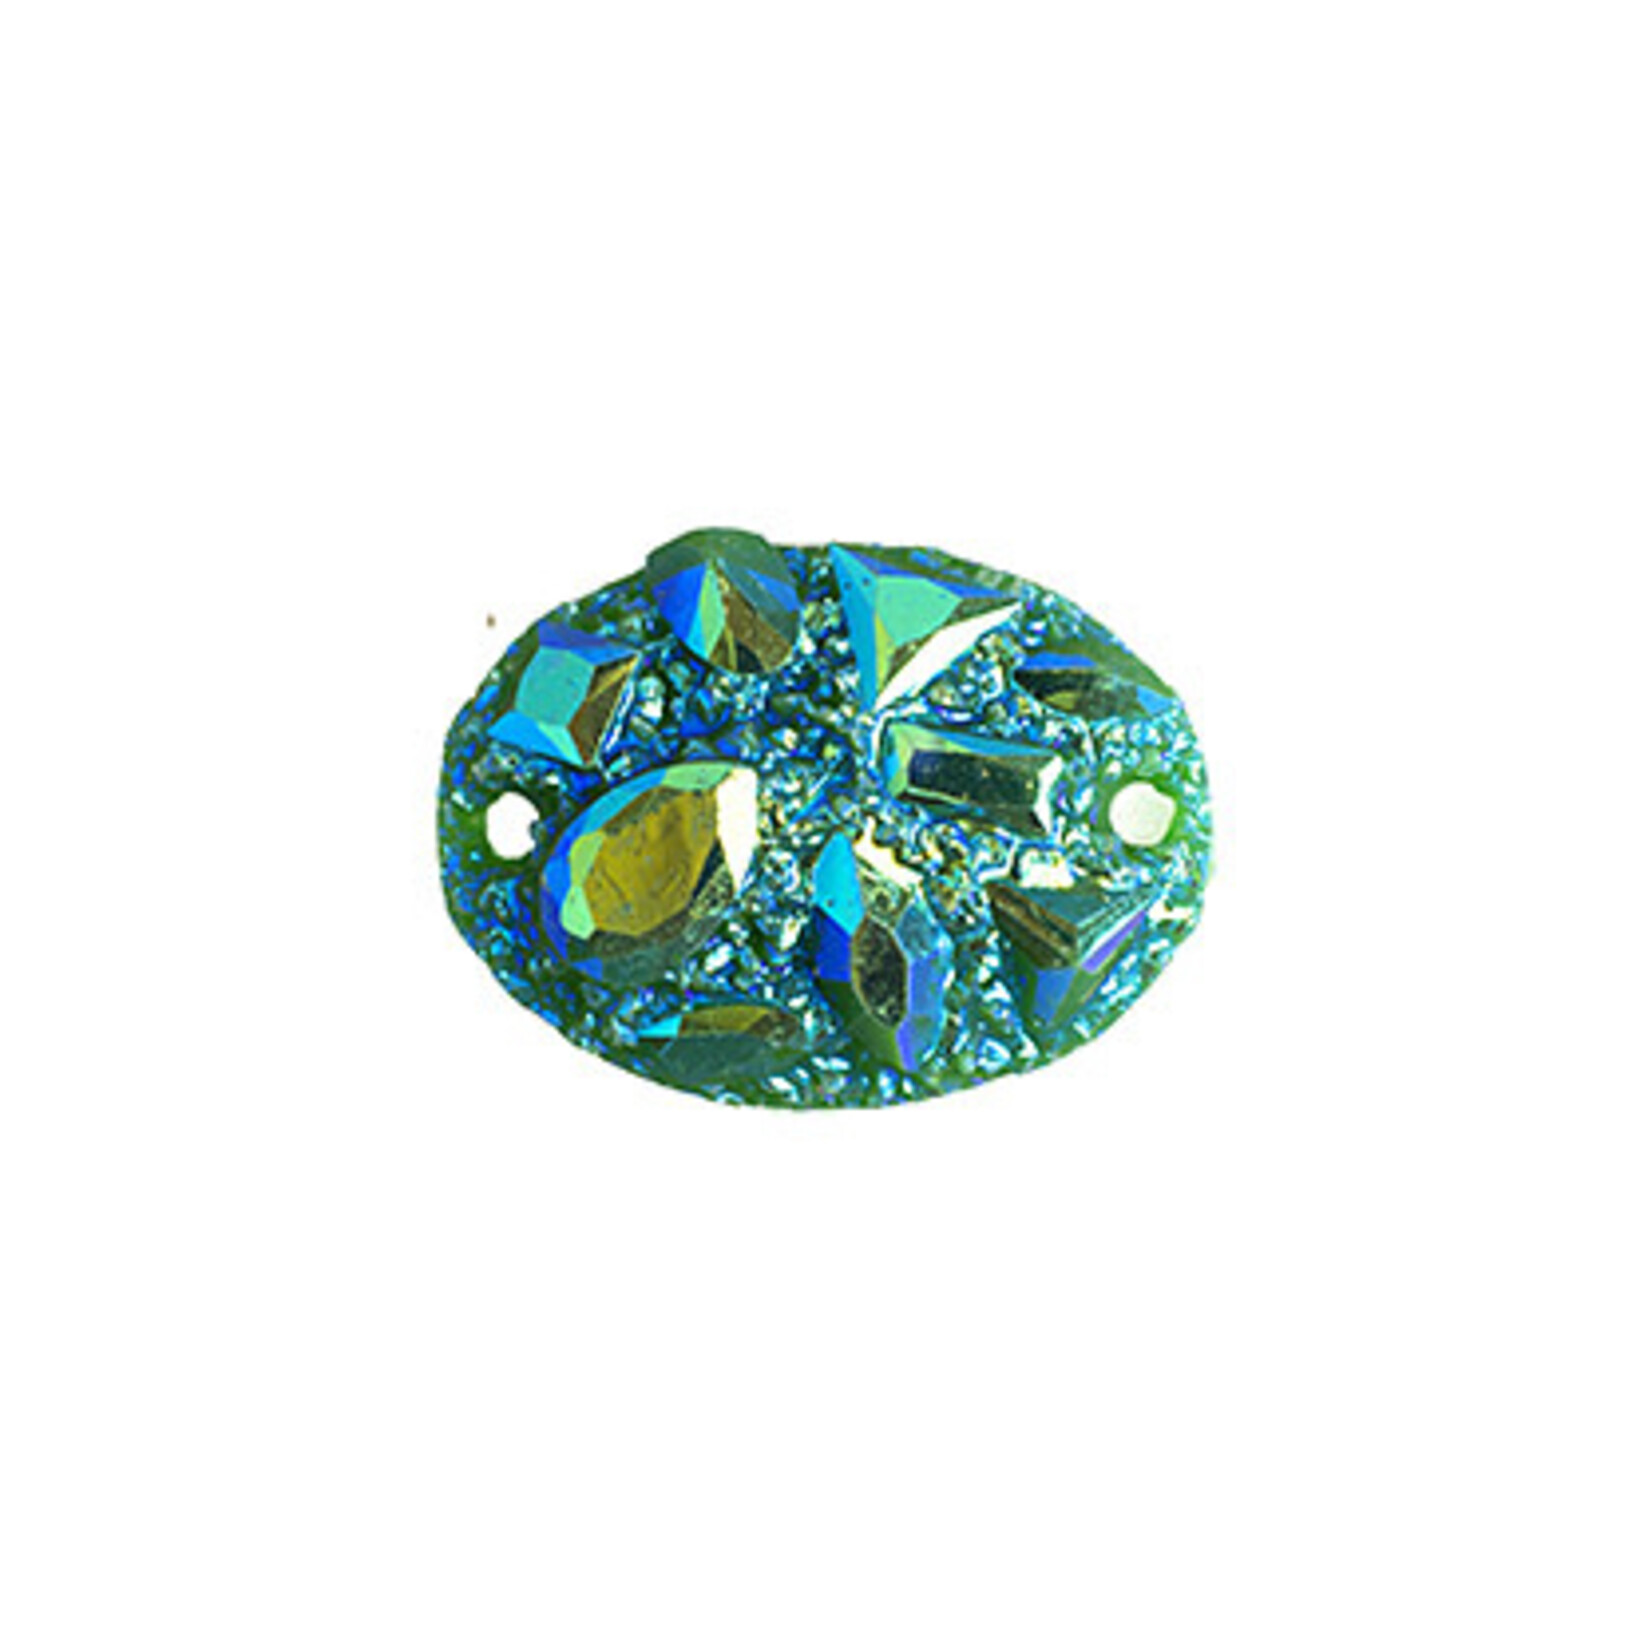 Moon Rock Resin Sew-On Stone 13 x 18 mm Oval (10 Pieces)